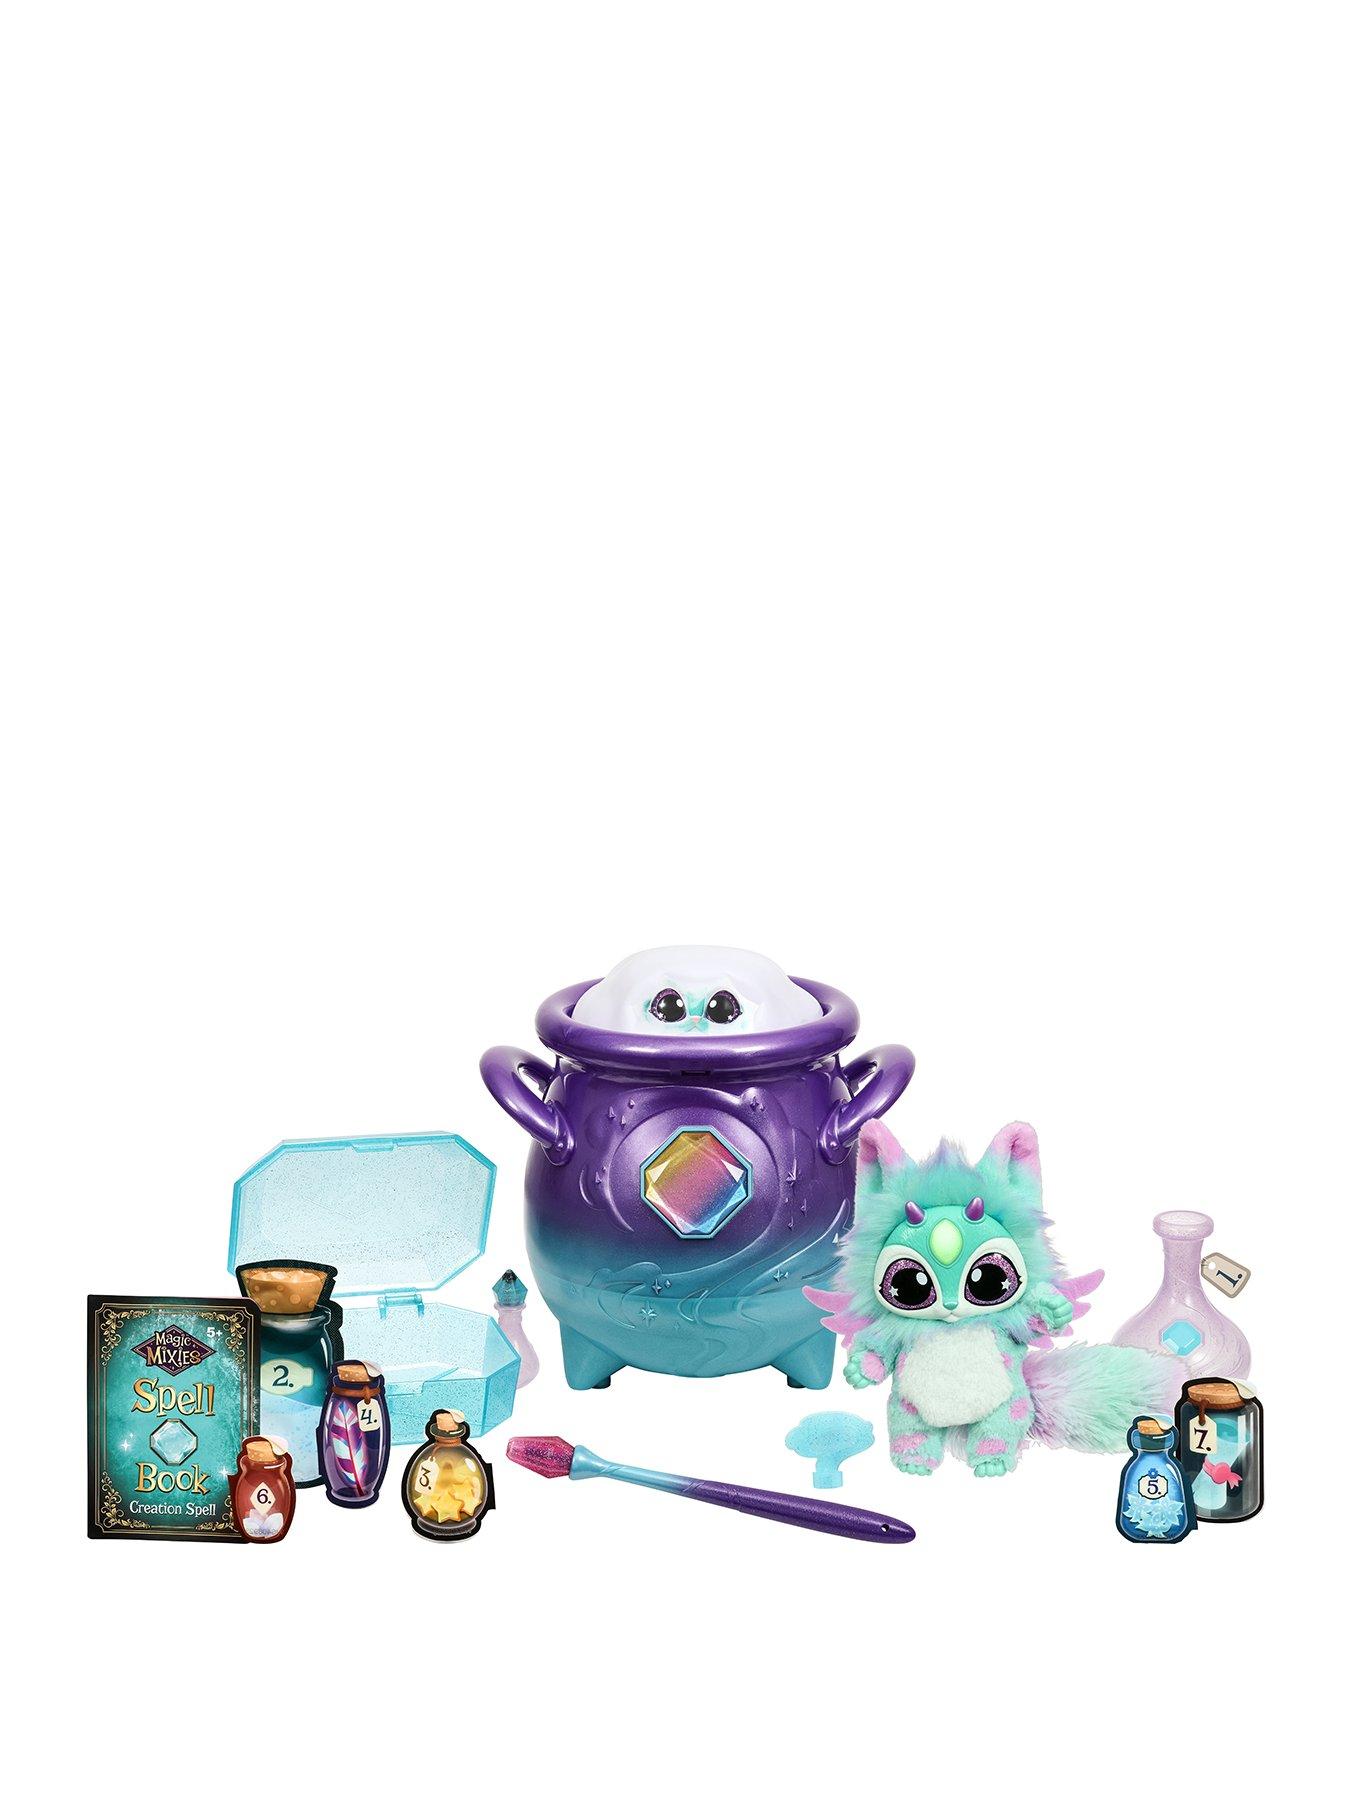 Magic Mixies Magical Gem Surprise Fire Magic Cauldron - Reveal a  Non-Electronic Mixie Plushie and Magic Ring with a pop up Reveal from The  Fizzing